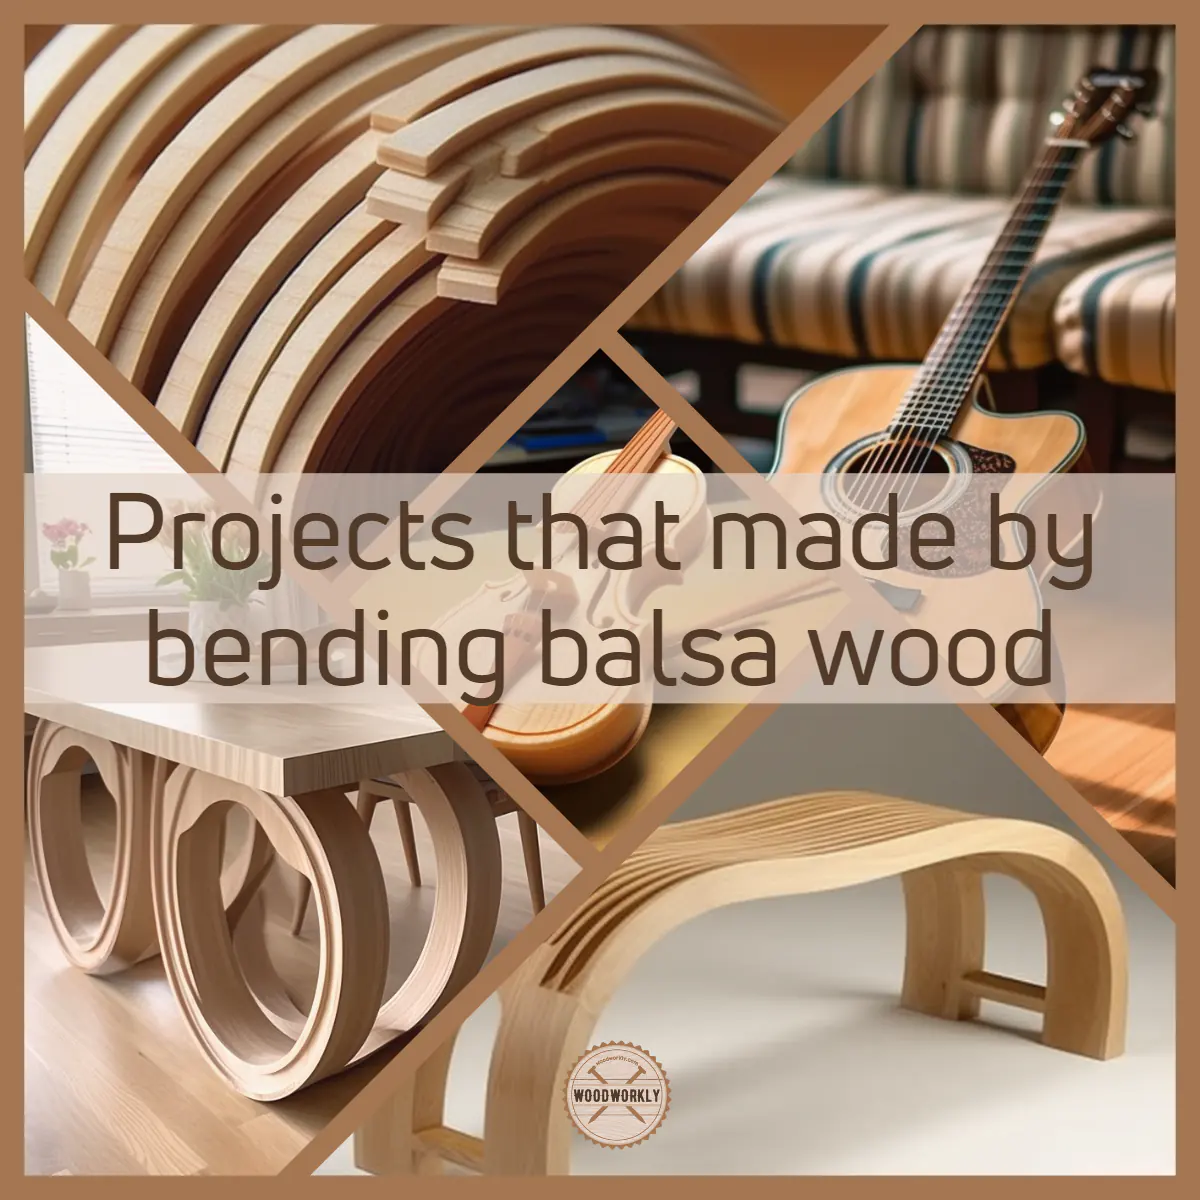 Projects that made by bending balsa wood